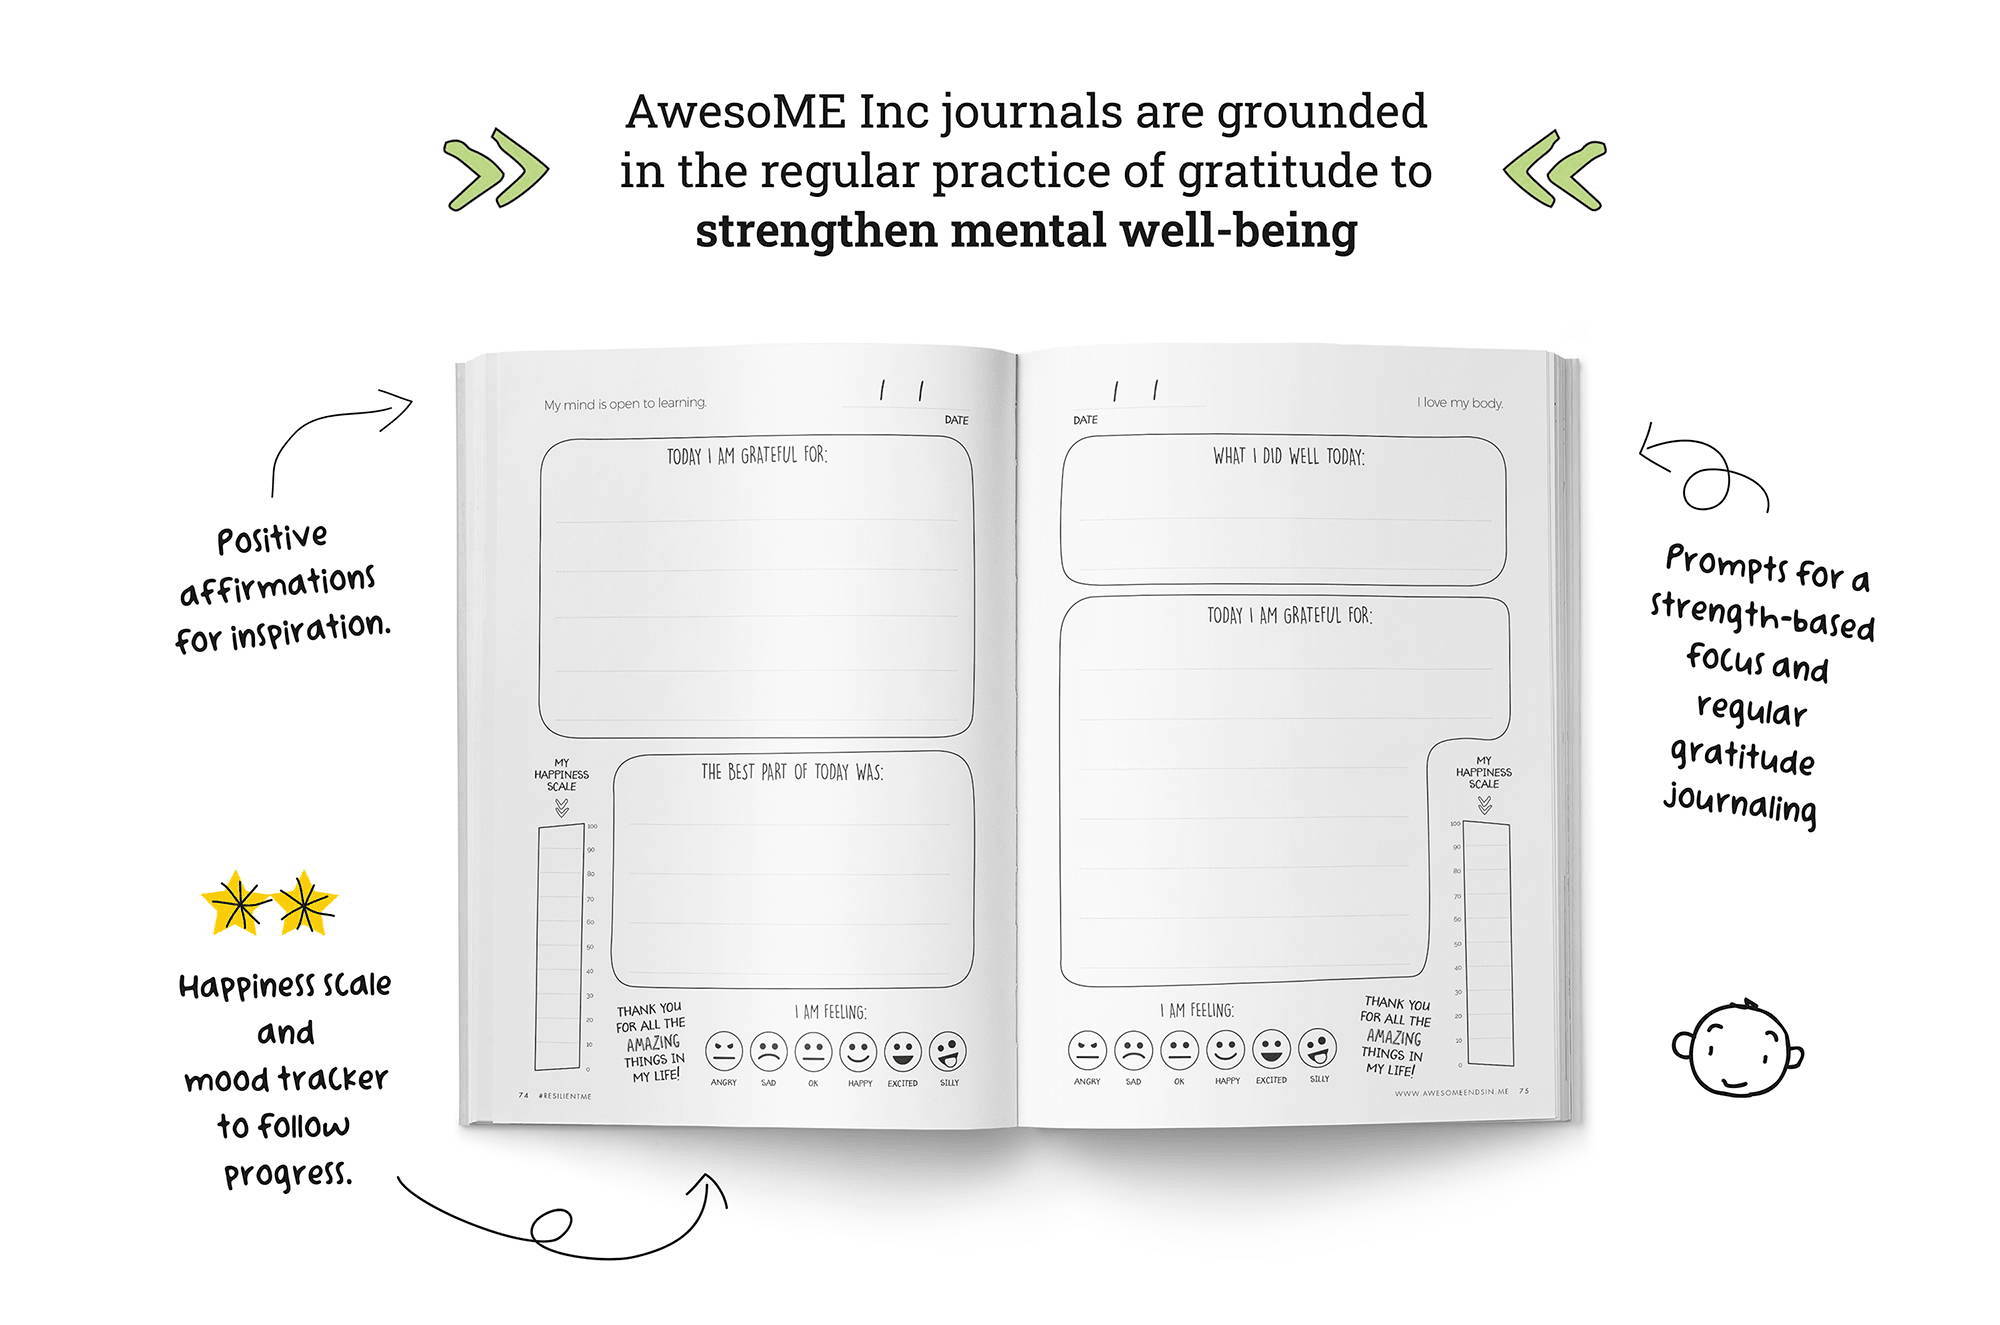 Awesome inc journals are grounded in the regular practice of gratitude to strengthen mental well-being